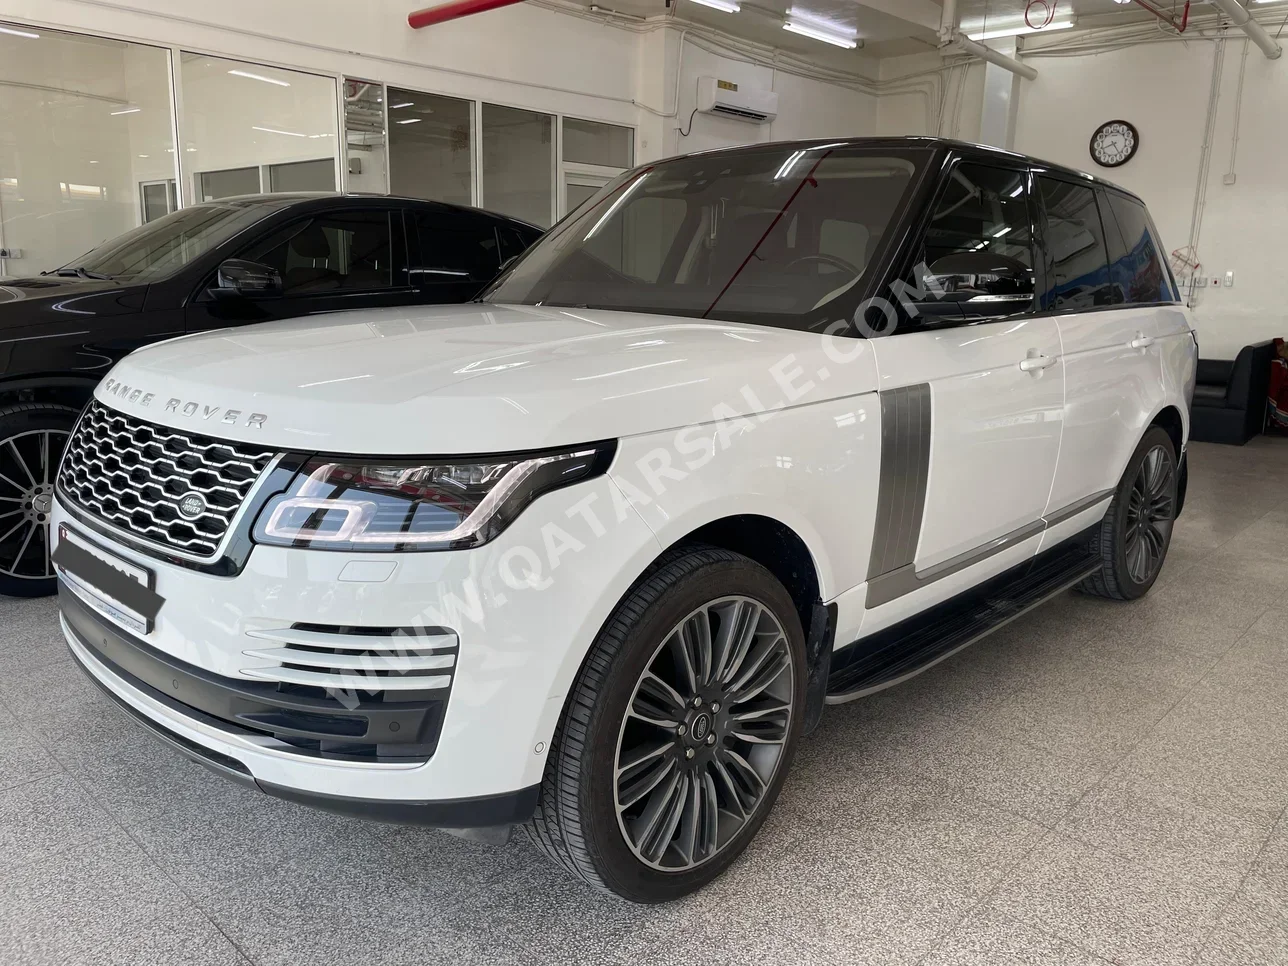 Land Rover  Range Rover  Vogue  2021  Automatic  36٬000 Km  6 Cylinder  Four Wheel Drive (4WD)  SUV  White  With Warranty